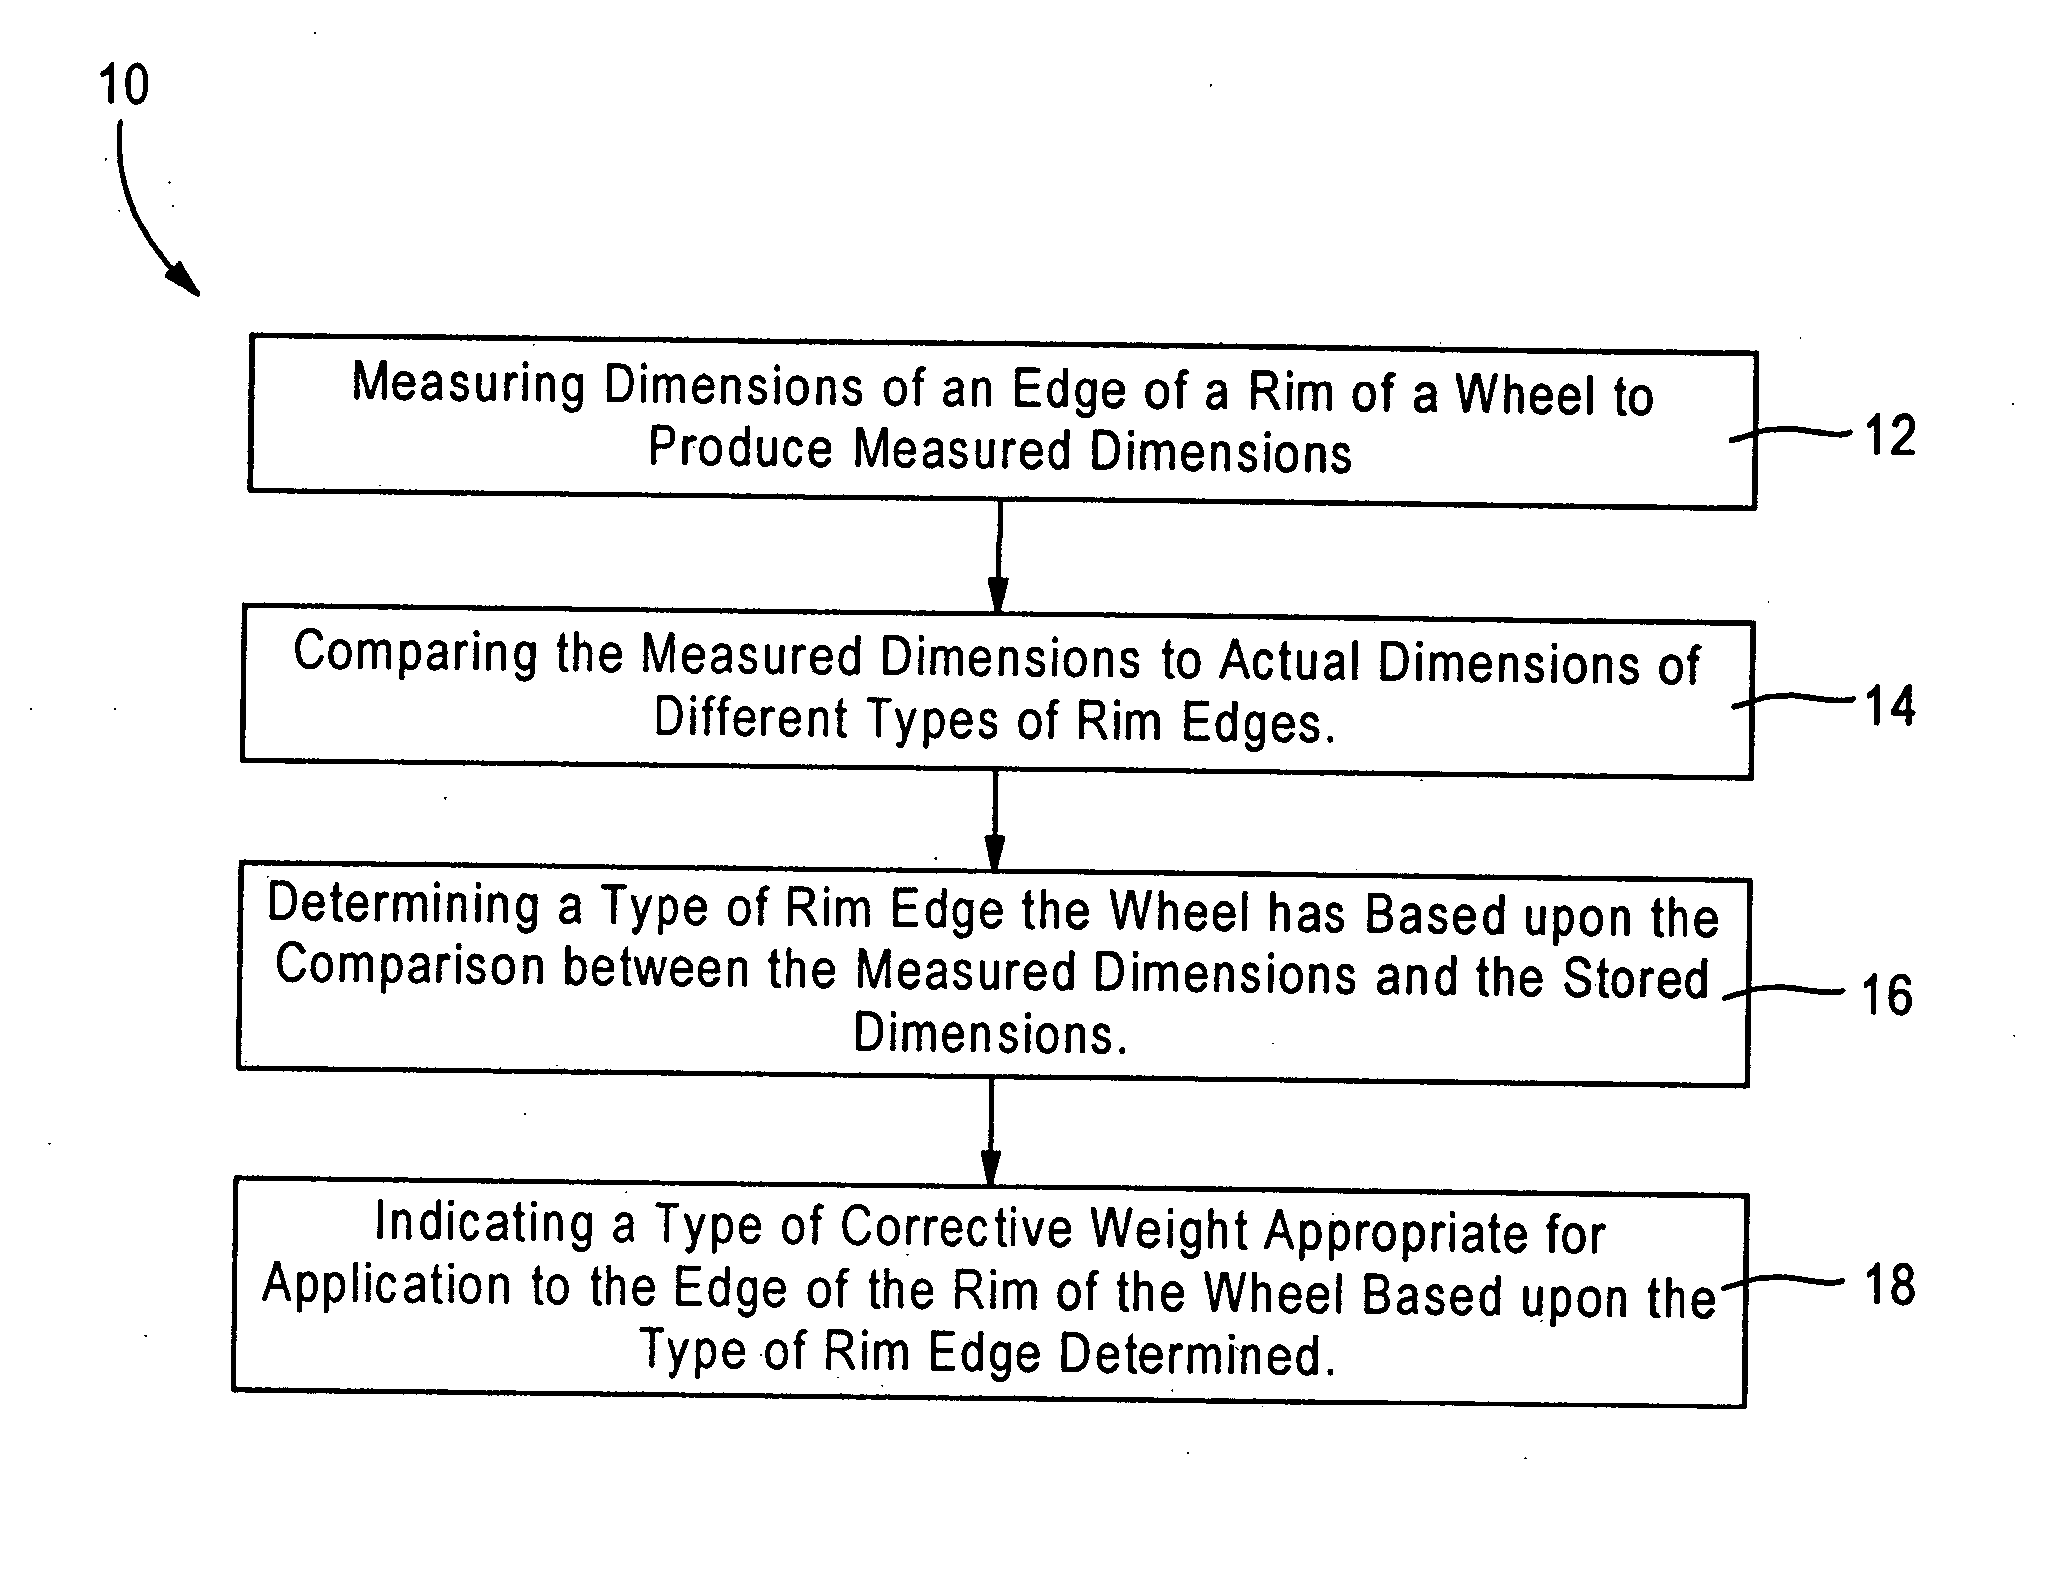 Method and apparatus for automotive rim edge analysis and corrective weight selection guide